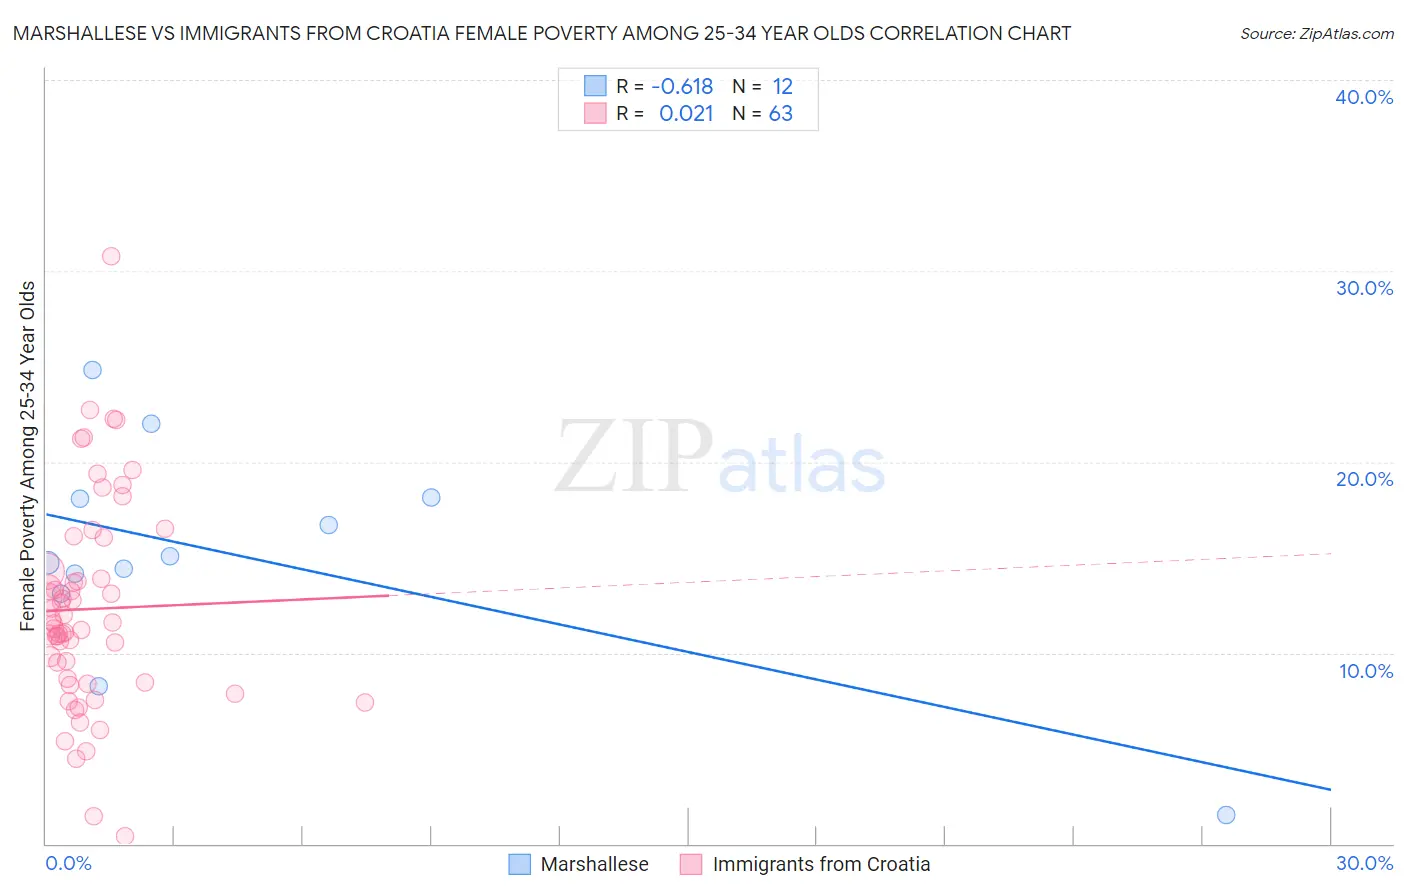 Marshallese vs Immigrants from Croatia Female Poverty Among 25-34 Year Olds